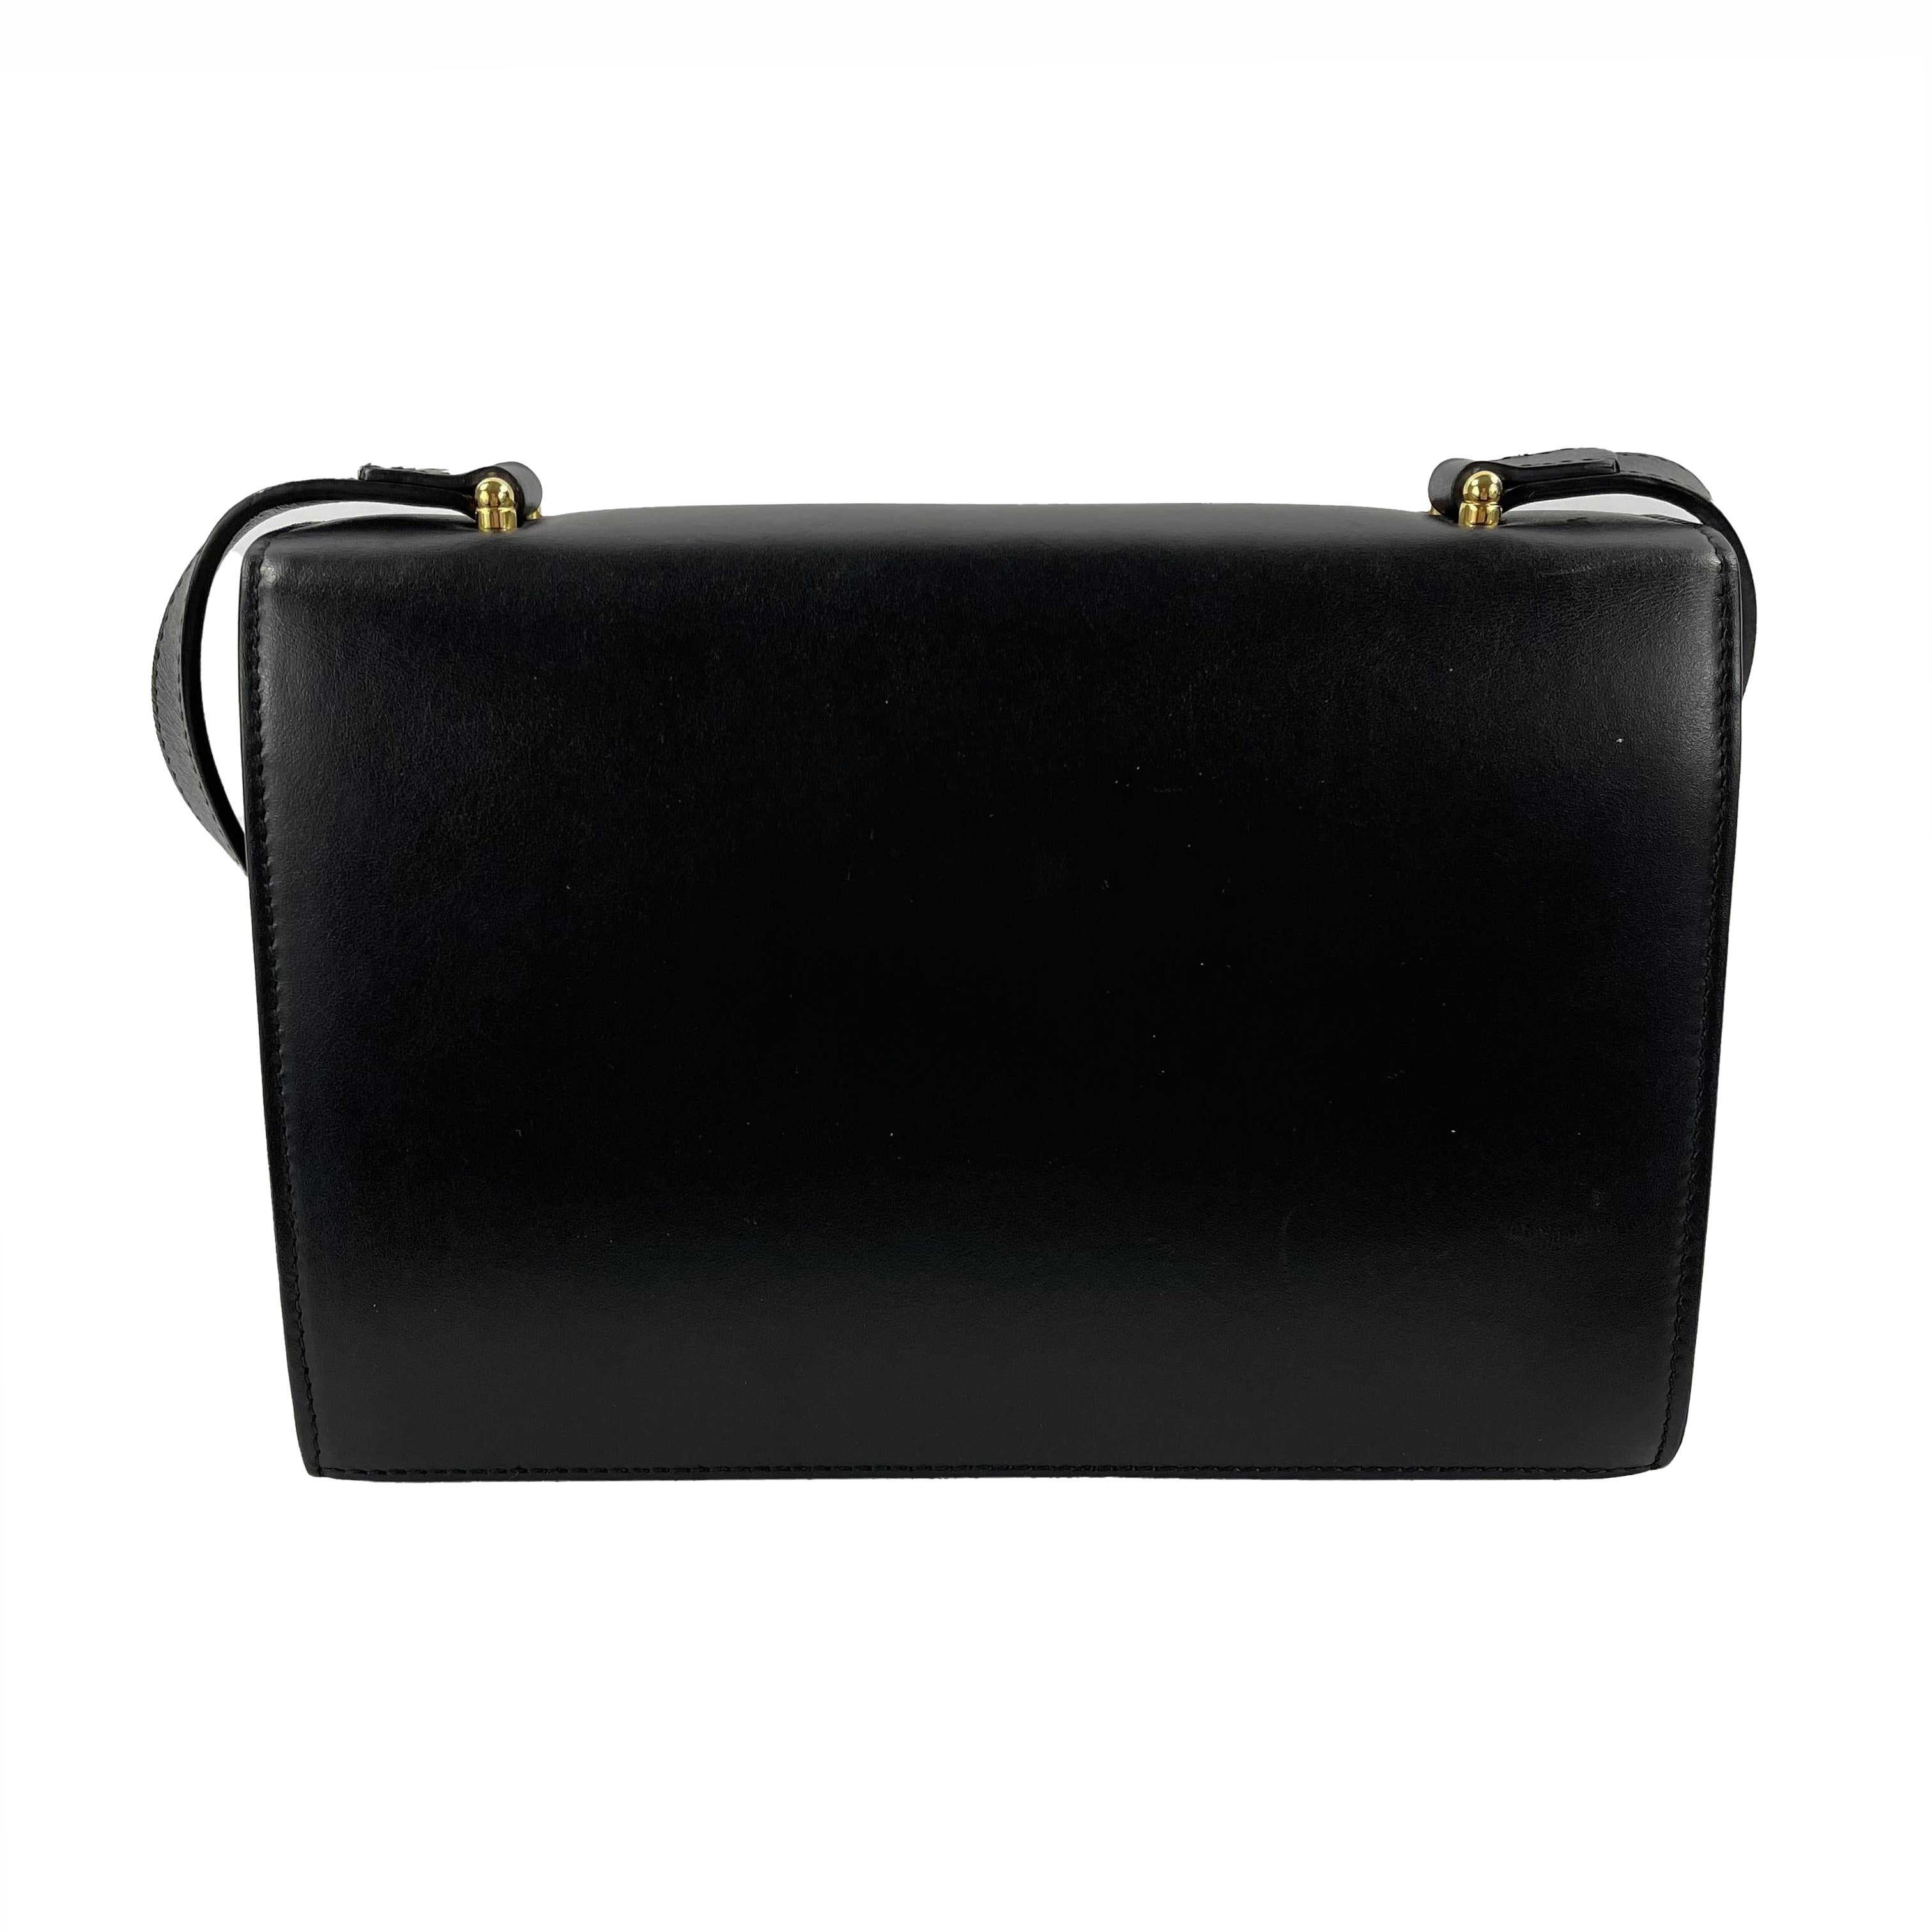 GUCCI - NEW Black / Silver-tone Calfskin Zumi Crossbody - Fold over Flap Bag

Description

This Gucci Zumi Shoulder bag is crafted of smooth calfskin leather in black and features a fold-over top flap with squeeze lock clasp closure in a silver and